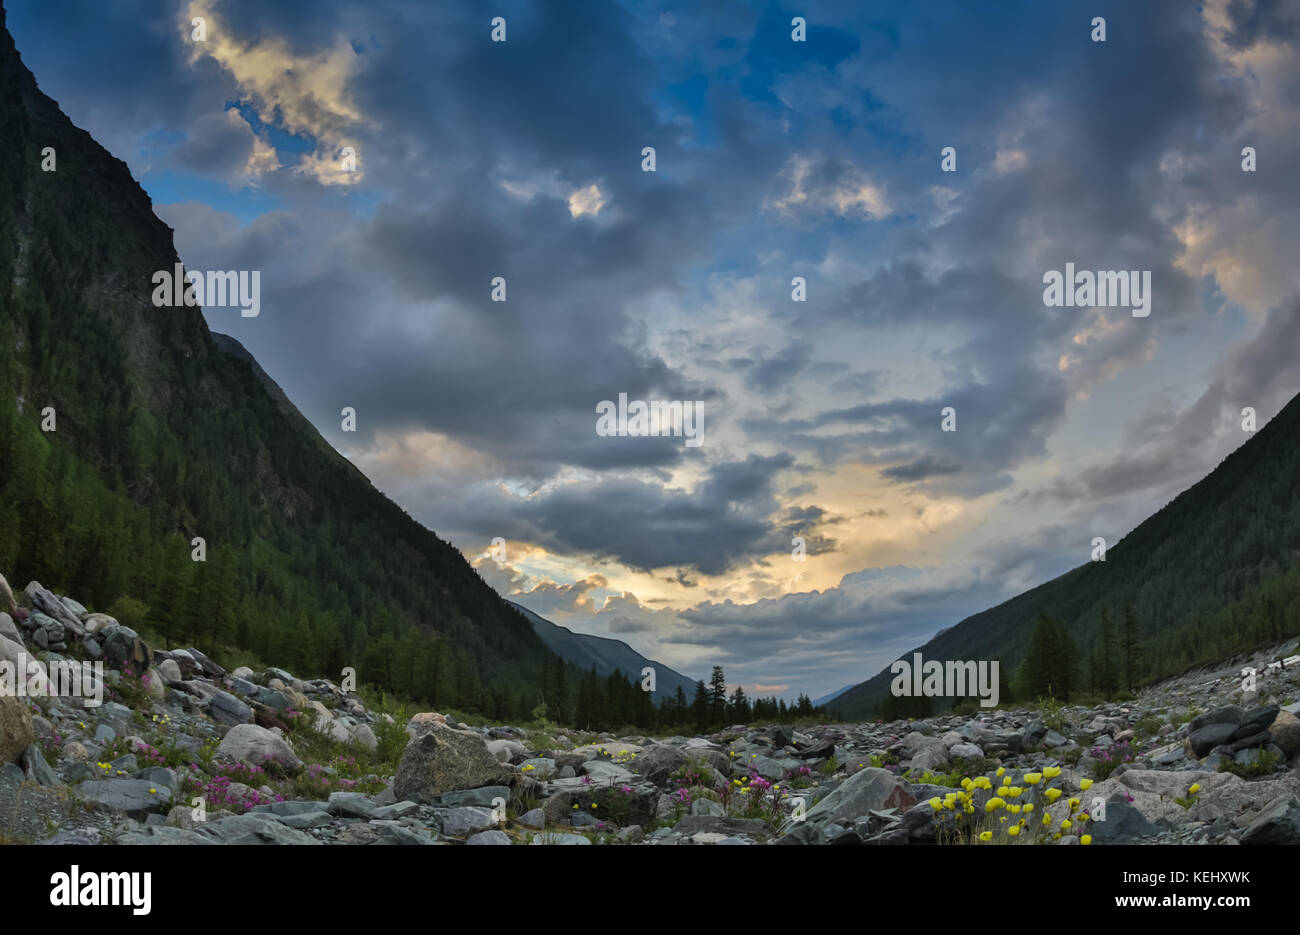 sunrise,sunset at the foot of the Belukha mountain, Altai Mountains, Russia. Stock Photo